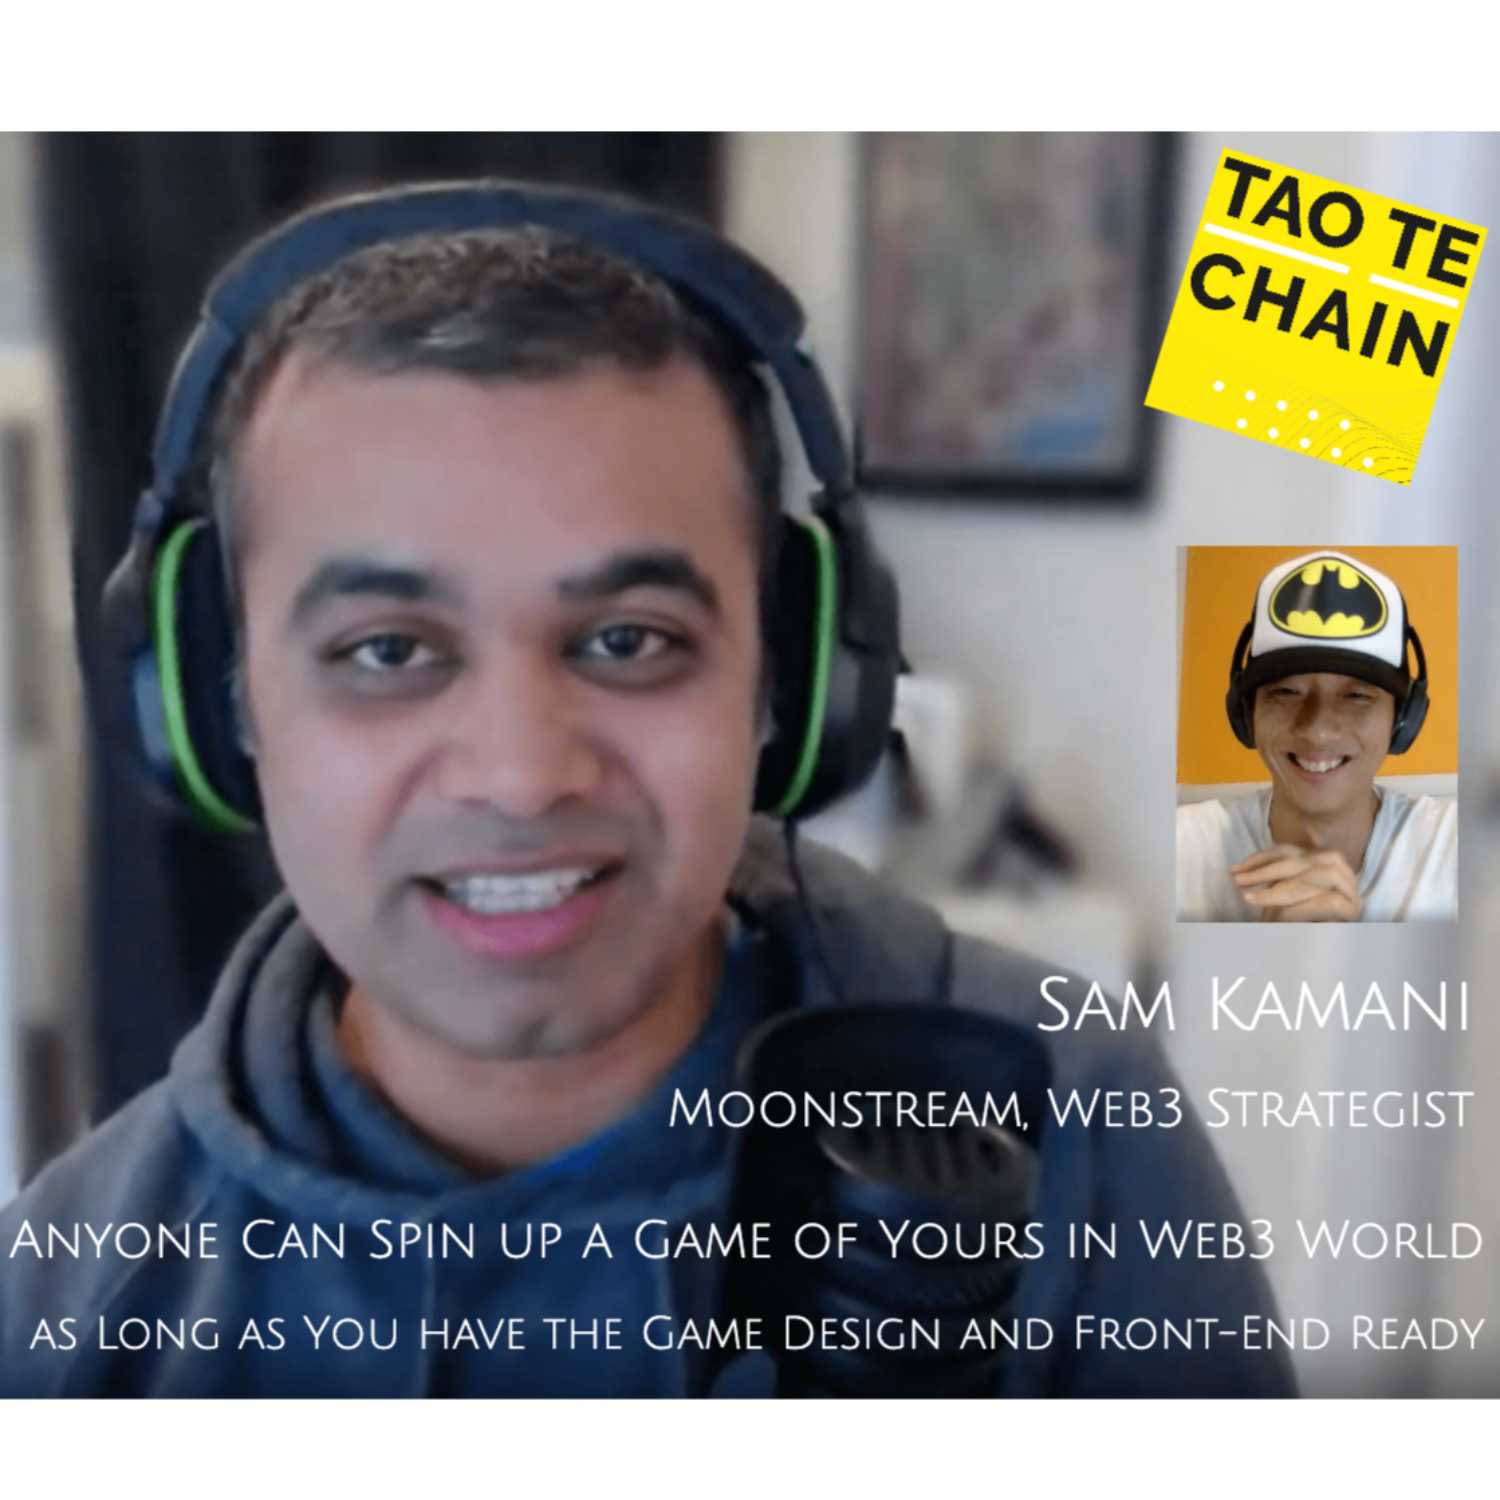 Sam Kamani - Anyone Can Spin up a Game of Yours in Web3 World, as Long as You have the Game Design and Front-End Ready